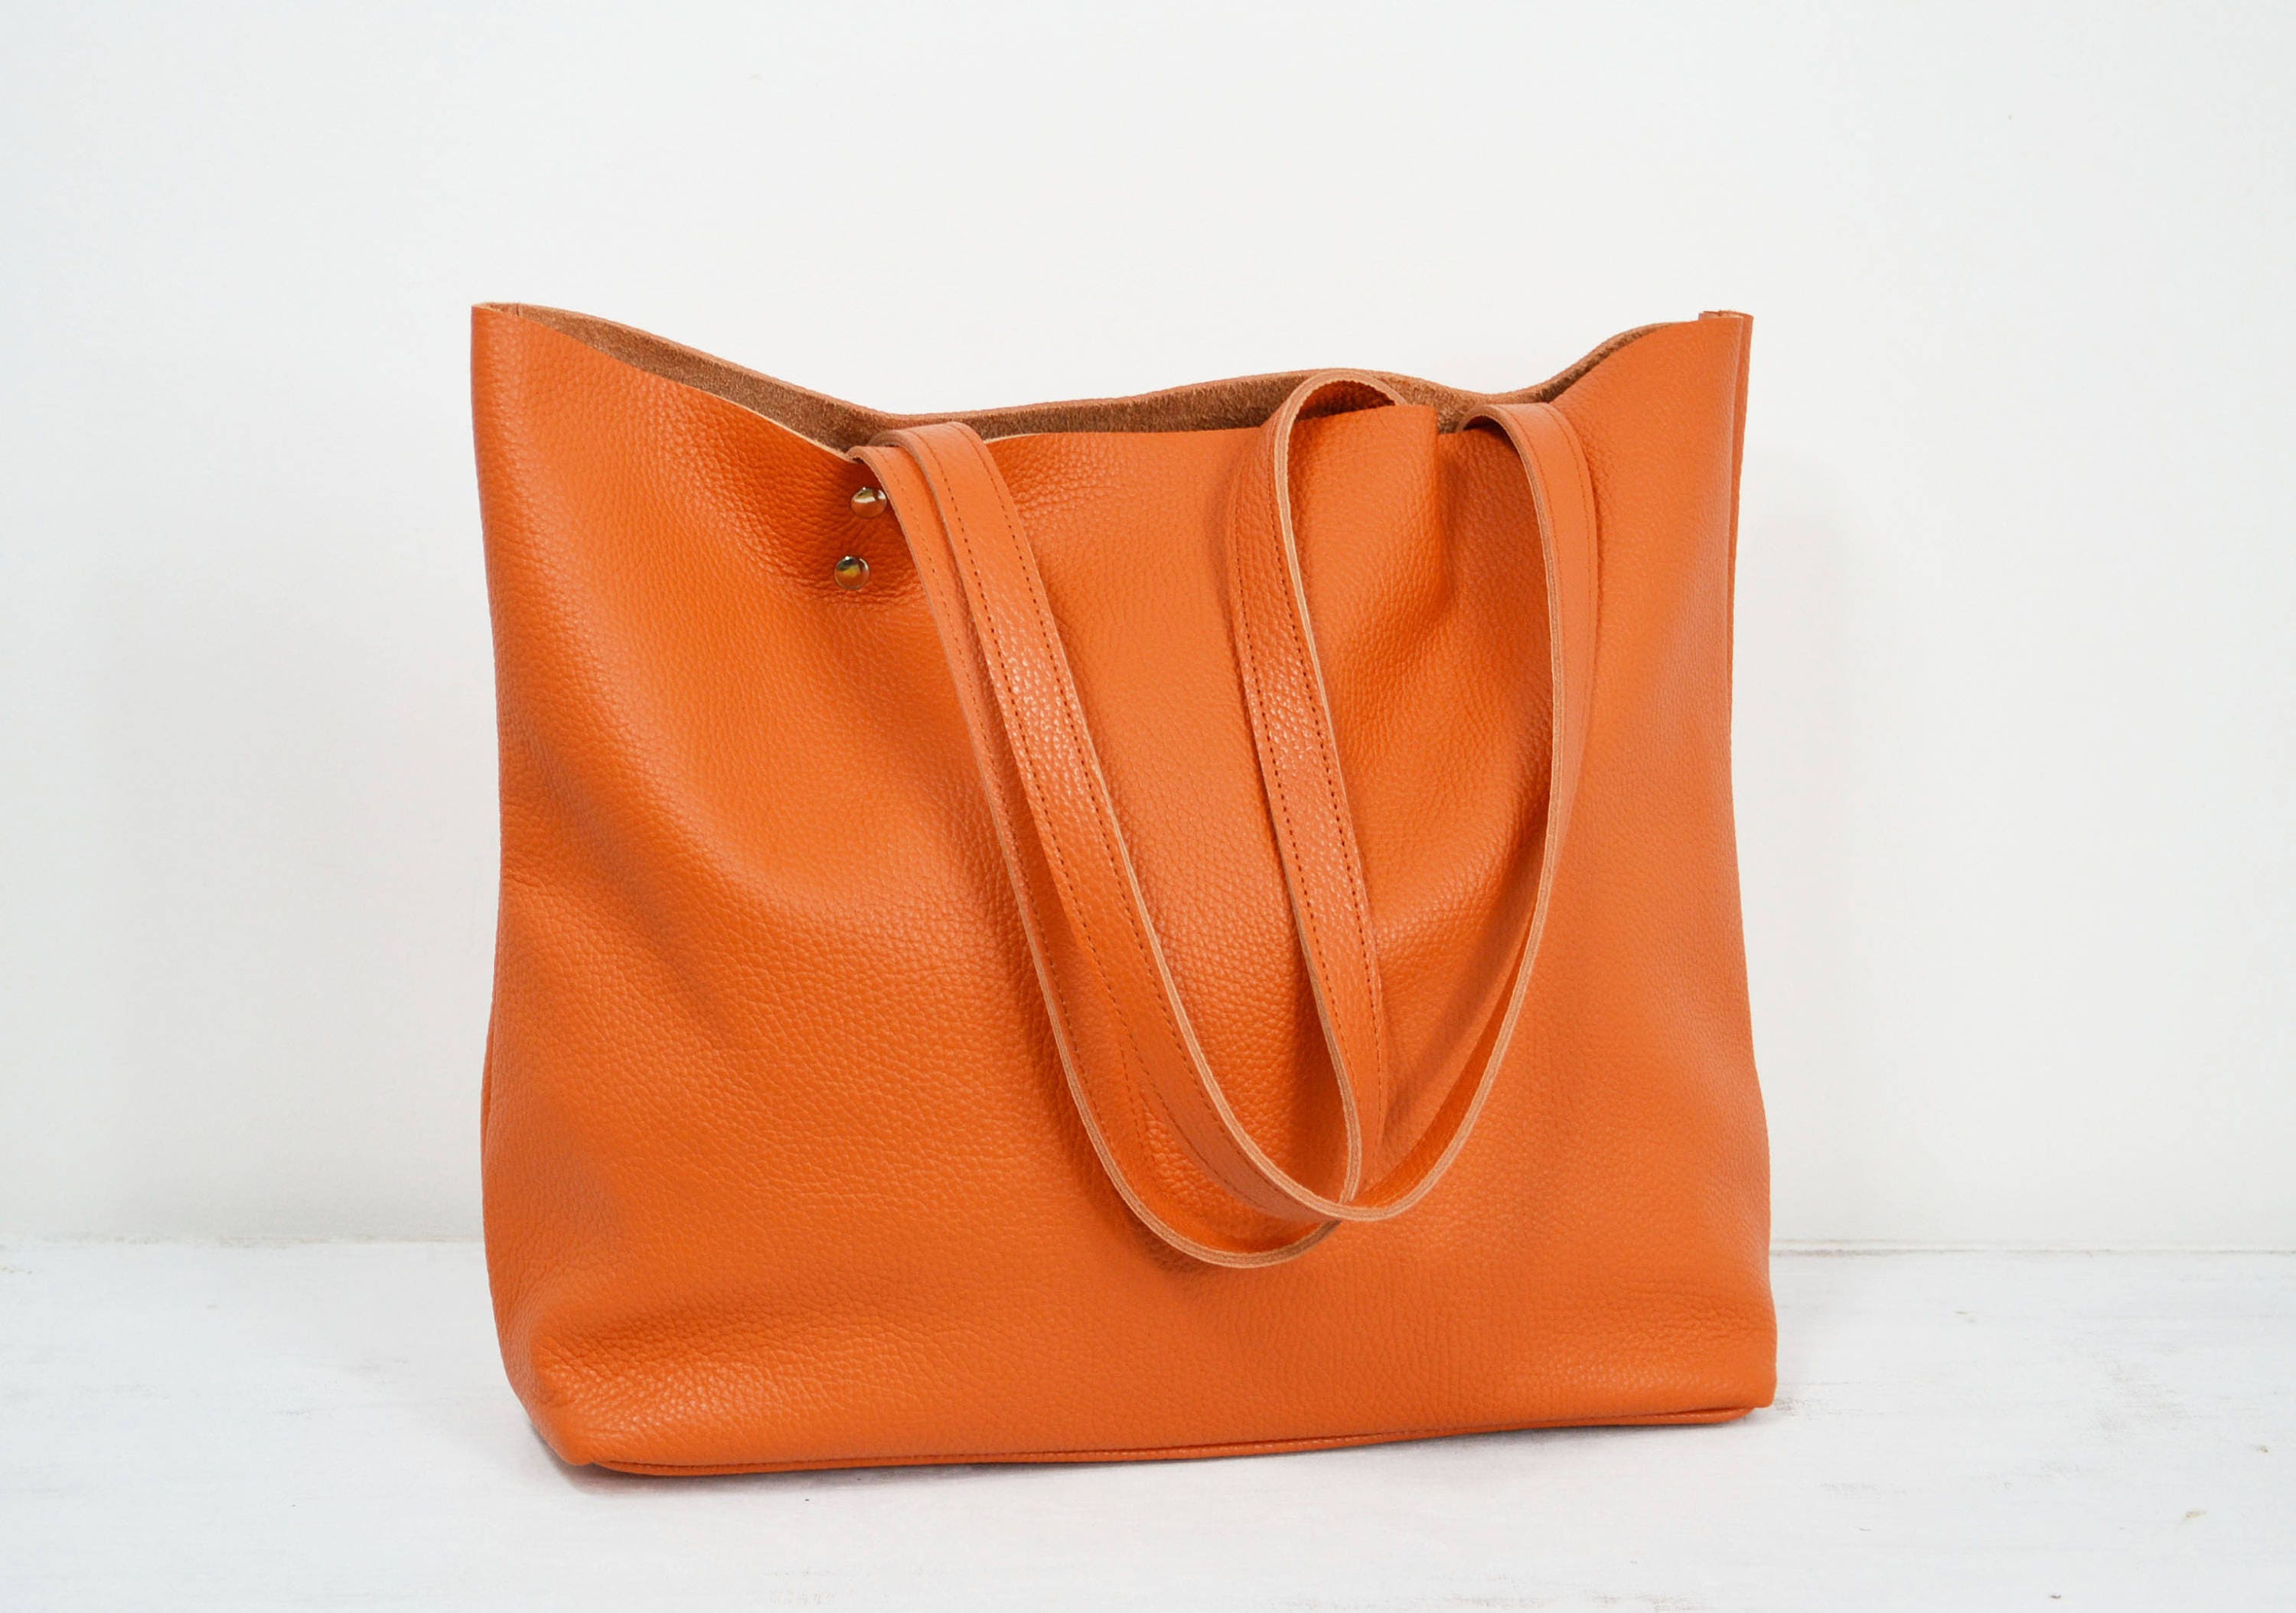 LEATHER TOTE With Zipper Leather Tote Woman Orange Leather - Etsy